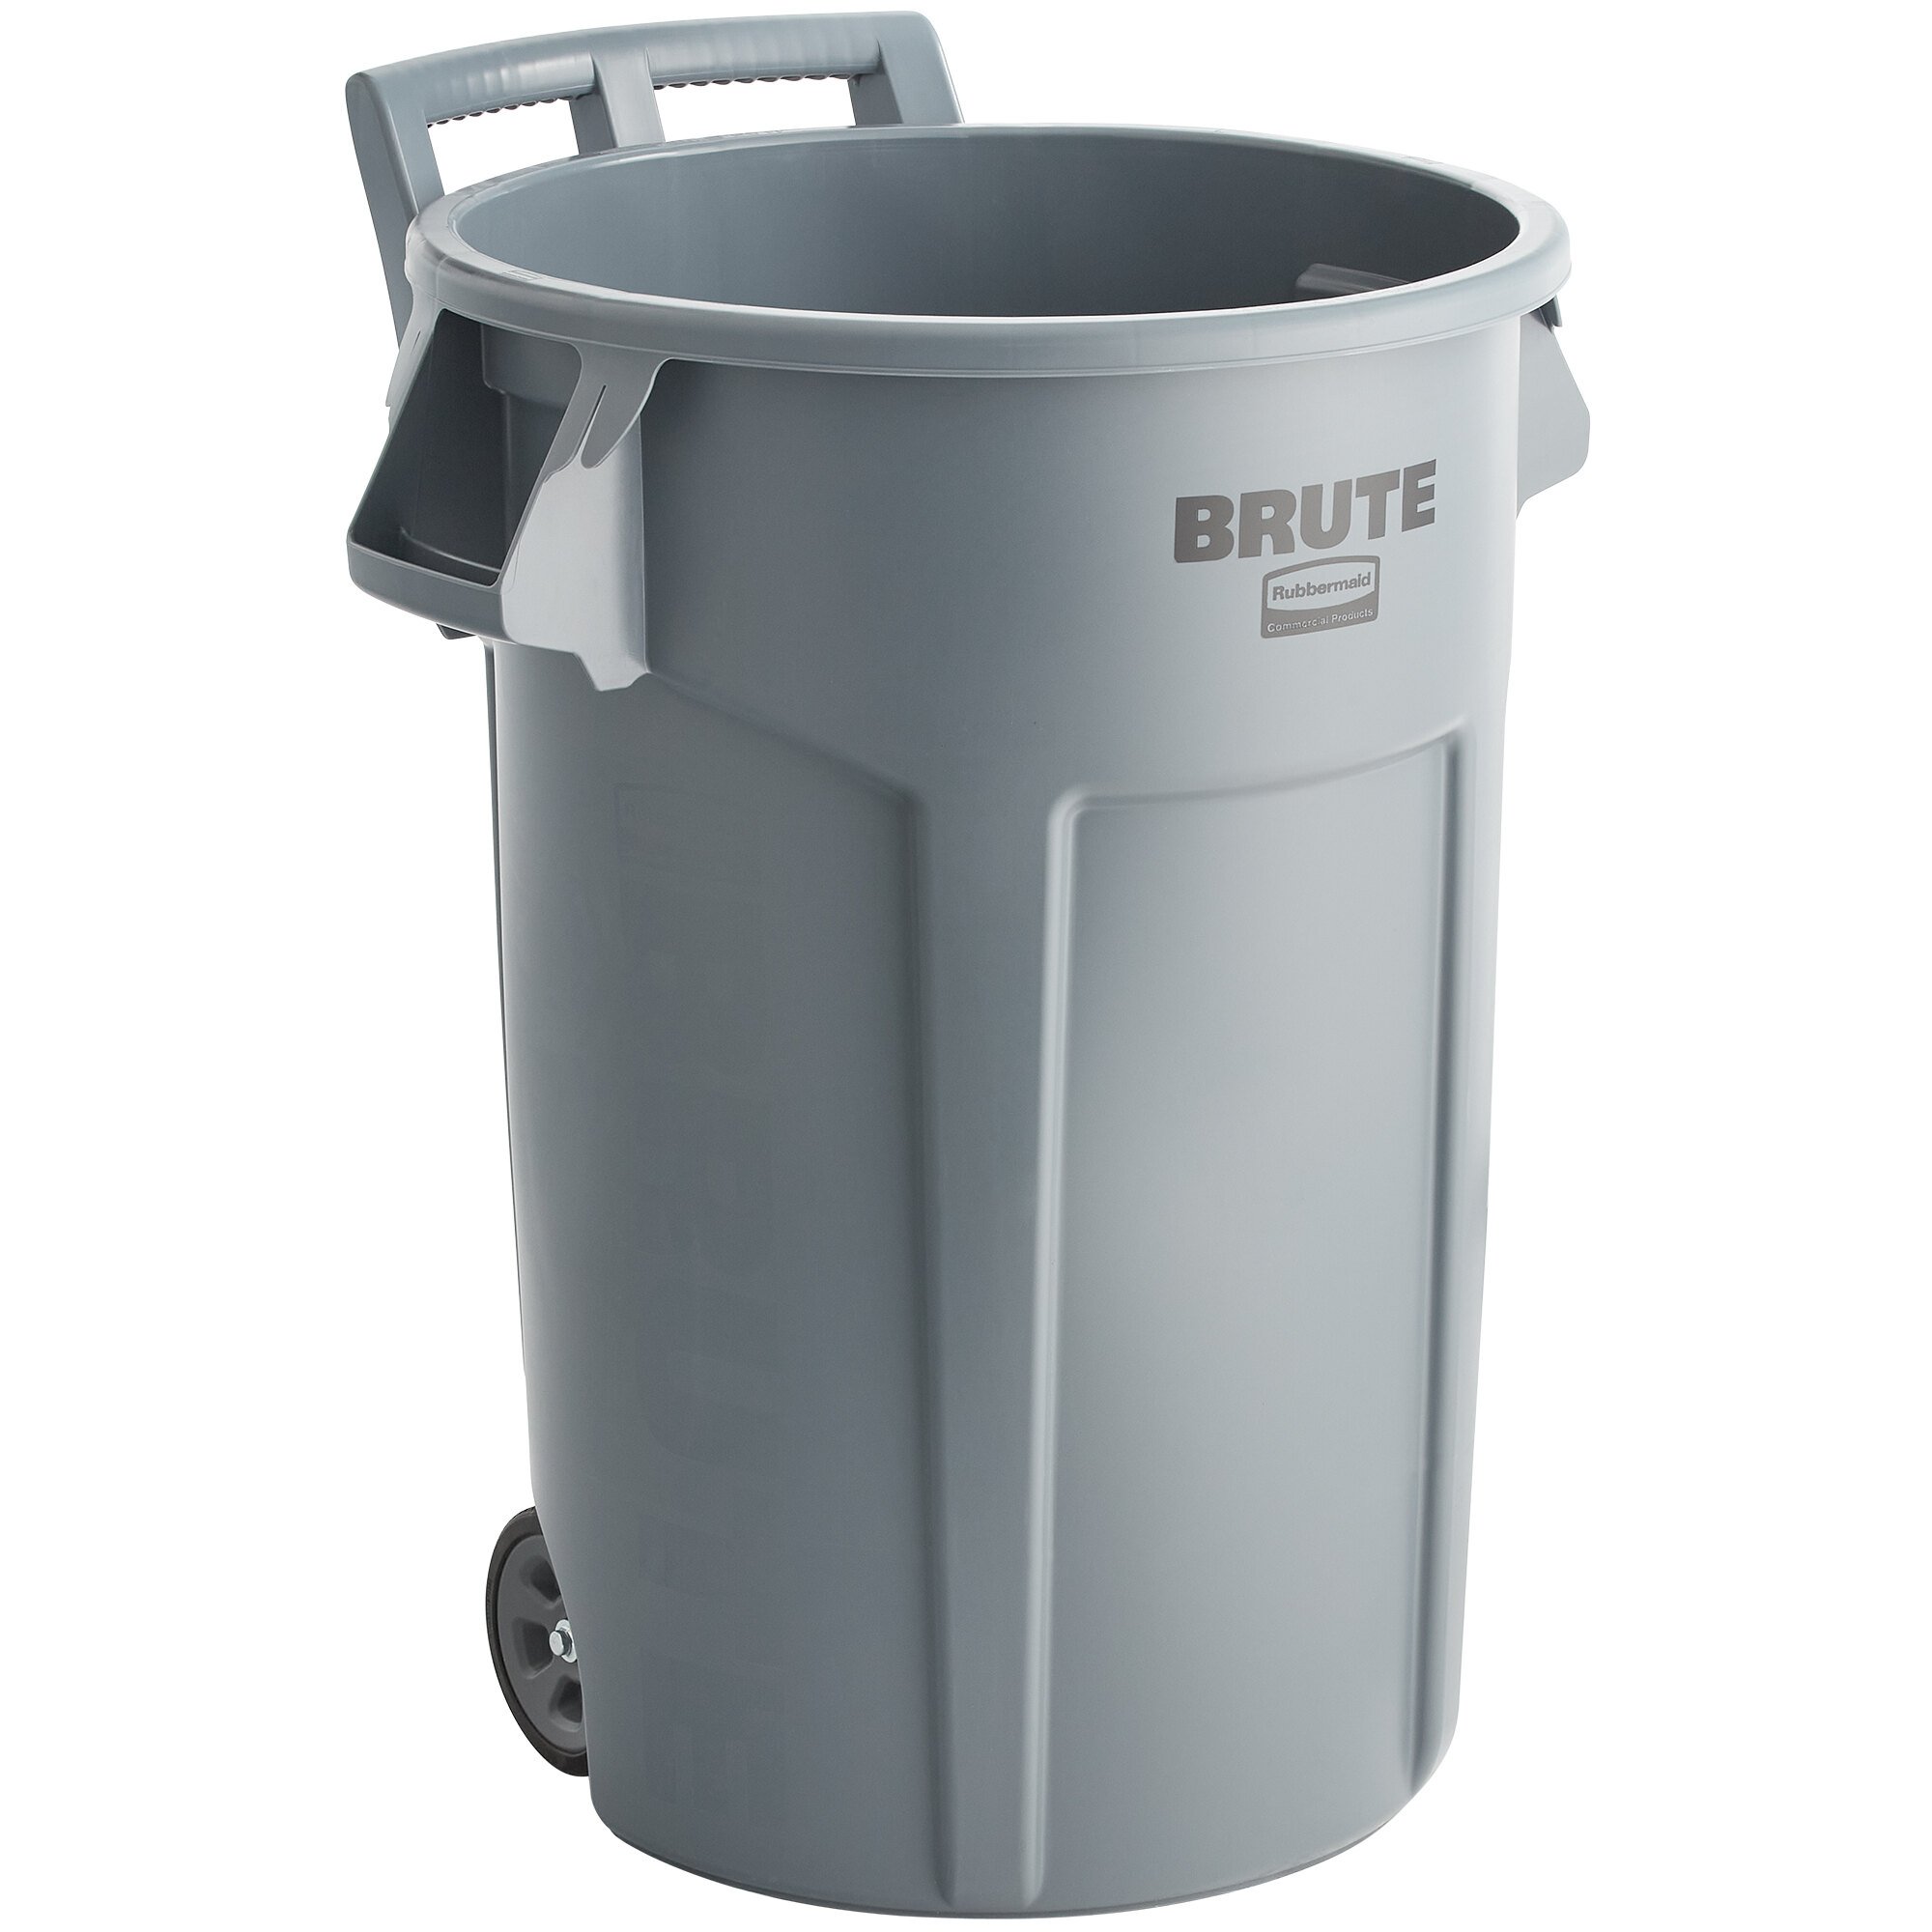 Rubbermaid 2131929 BRUTE 44 Gallon Gray Wheeled Round Trash Can